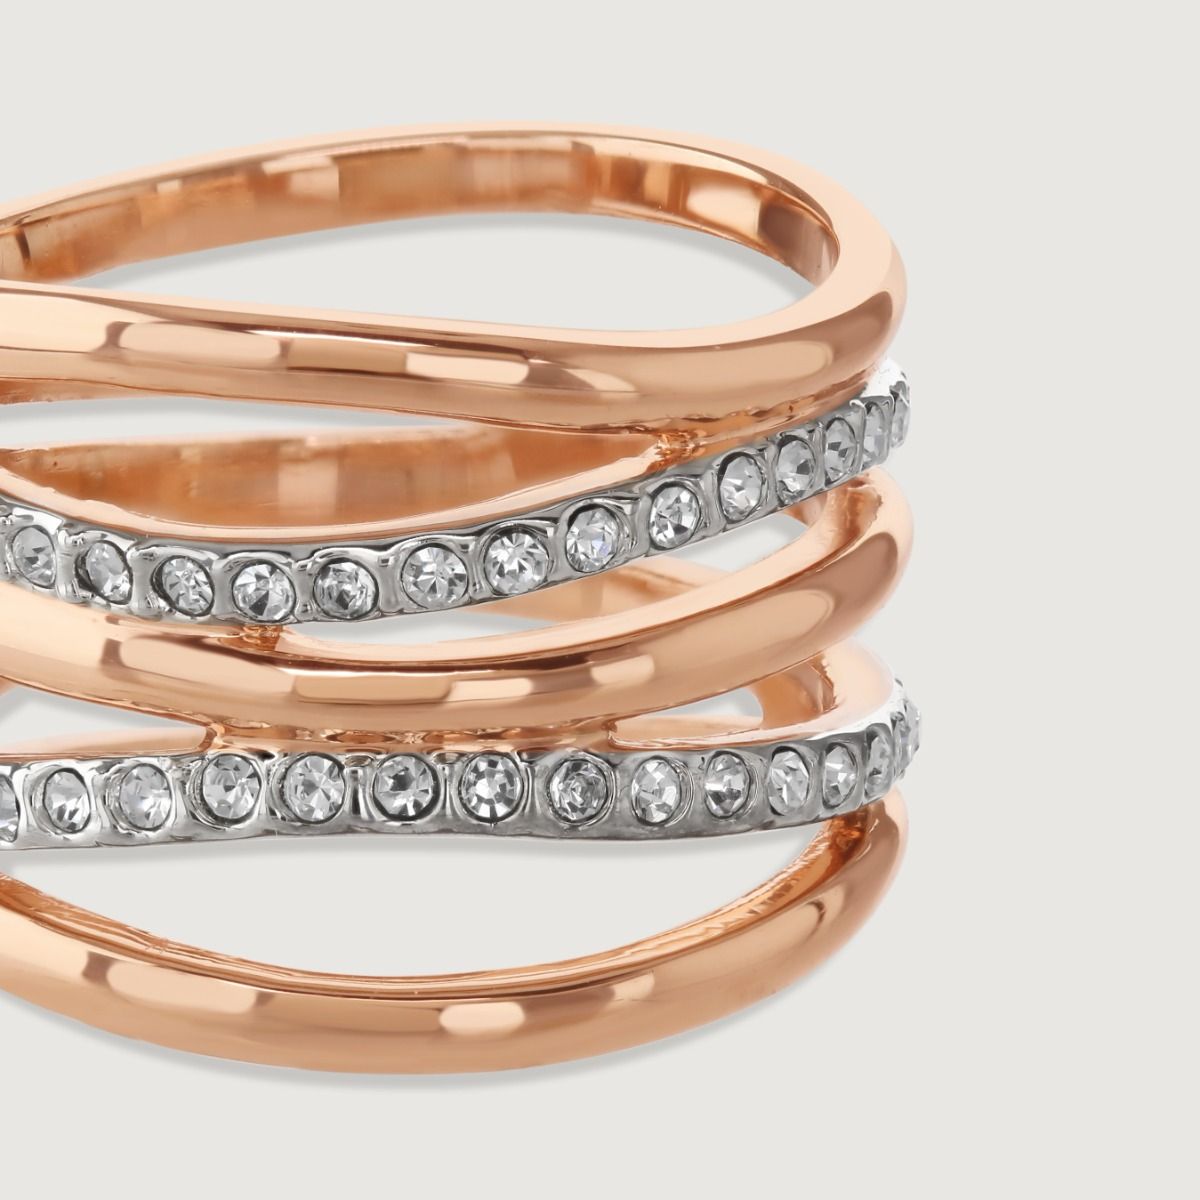 Flowing waves of warm rose gold plating enhanced by a shimmering central wave of white crystals make this clasp-opening Bayswater bangle contemporary and luxurious. 